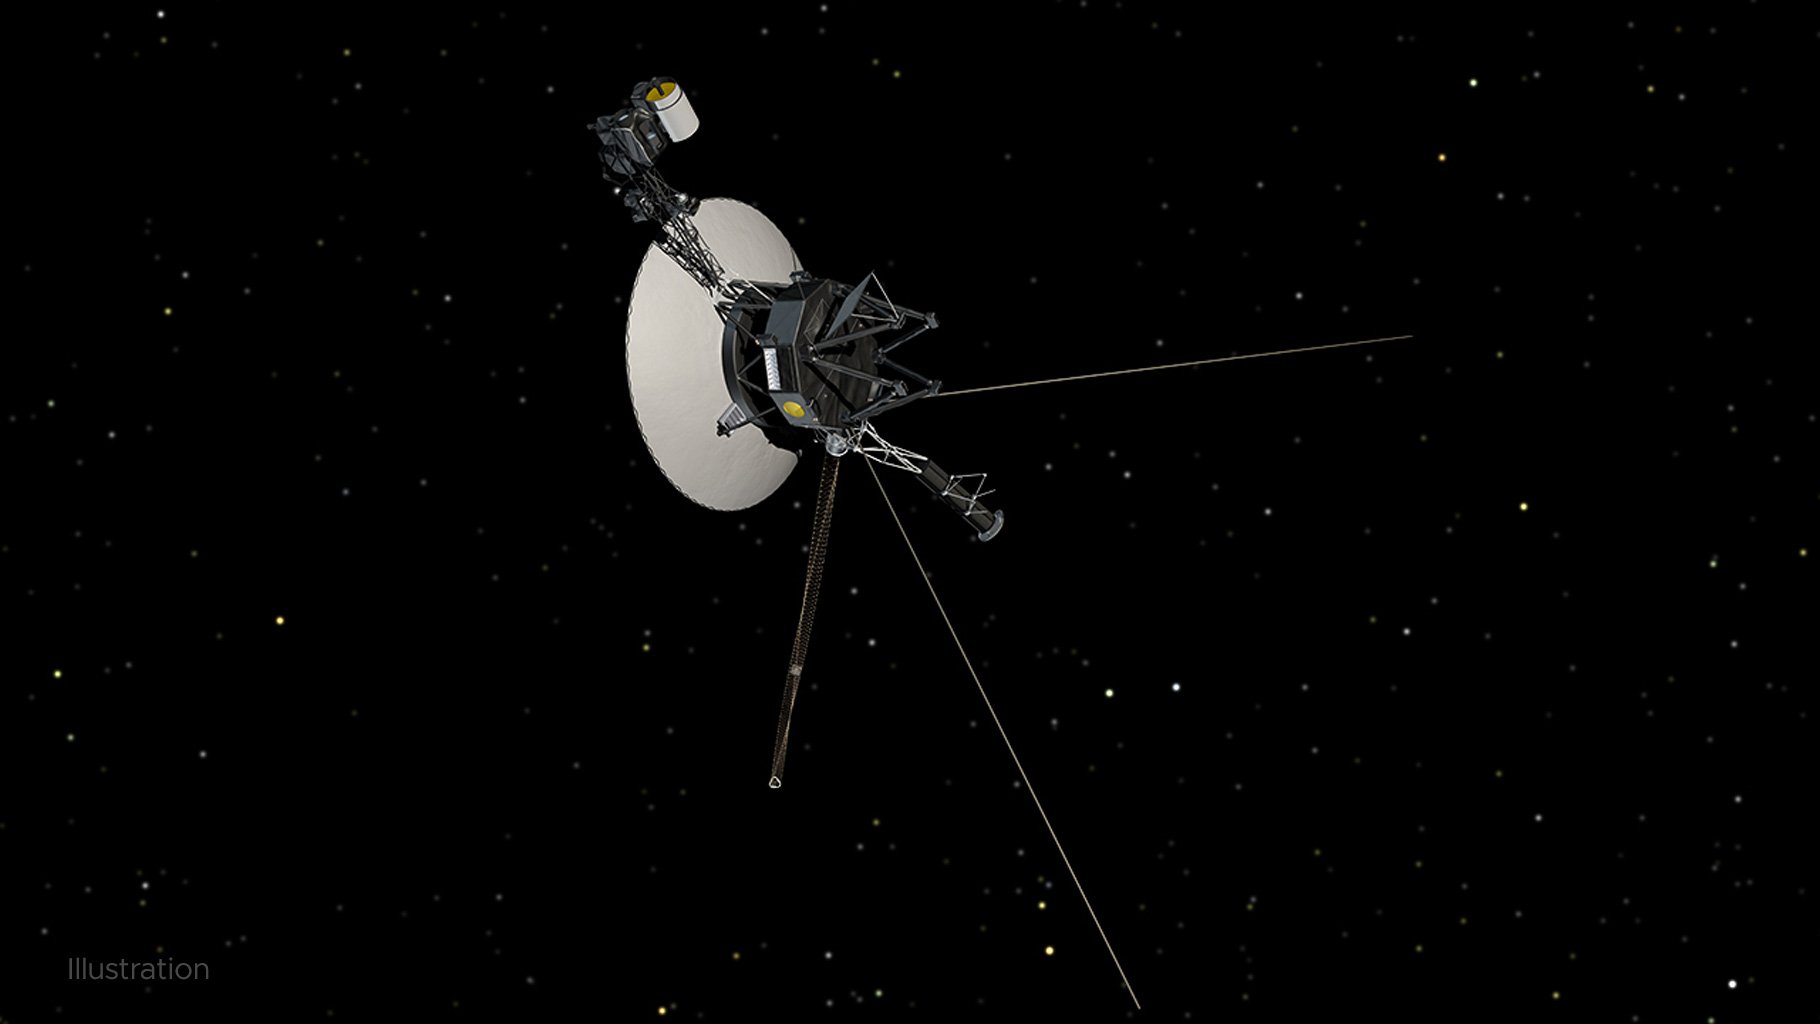 NASA's Voyager 1 probe, pictured here, along with its twin Voyager 2, has been exploring our solar system since 1977